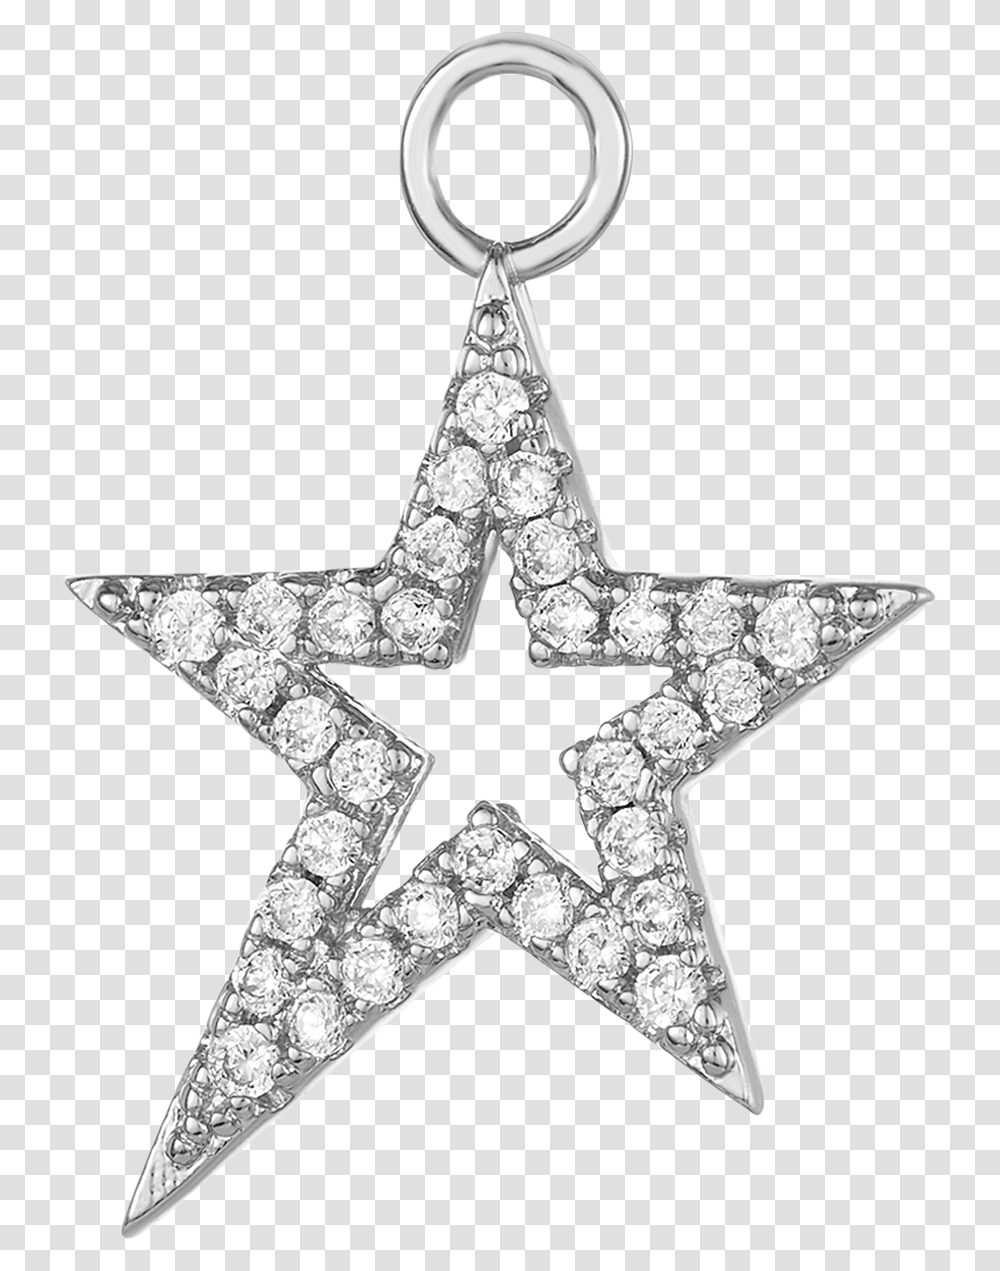 Icons Shooting Star Earring Charms Shadow Fight 2 Weapon Hammer, Cross, Symbol, Star Symbol, Pendant Transparent Png